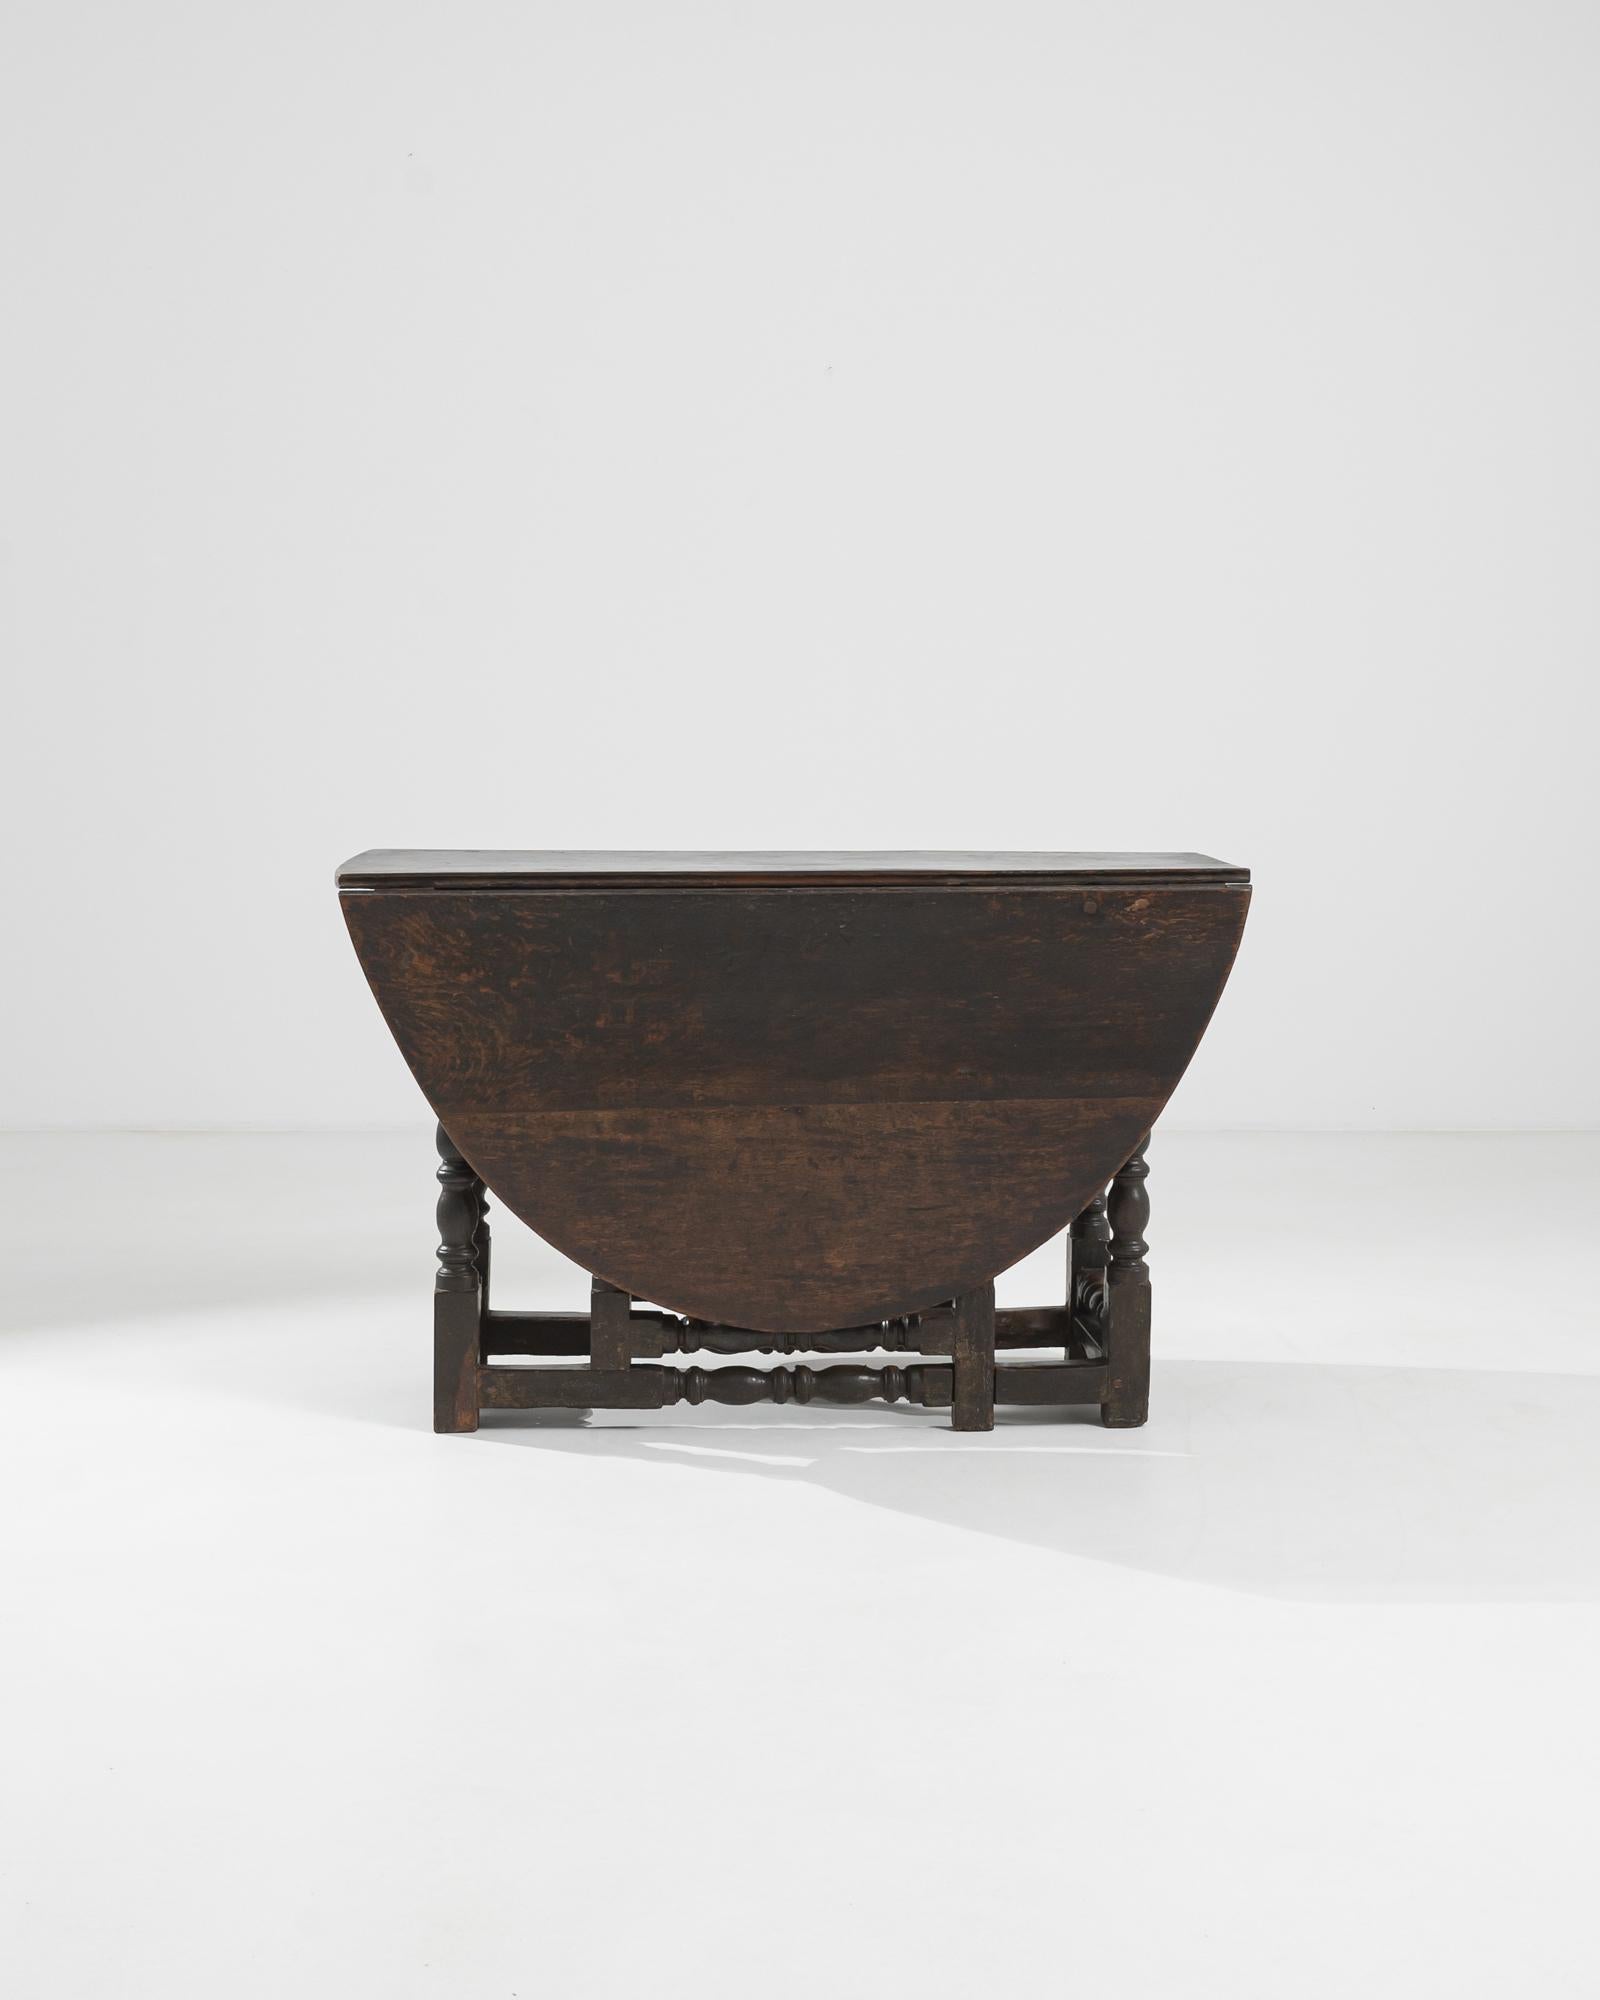 A gateleg table from the United Kingdom, circa 1900. Developed in England in the 16th Century, the gate leg table was an early marvel of space saving innovation. This example is crafted in characteristic oak. A round beveled top balances upon